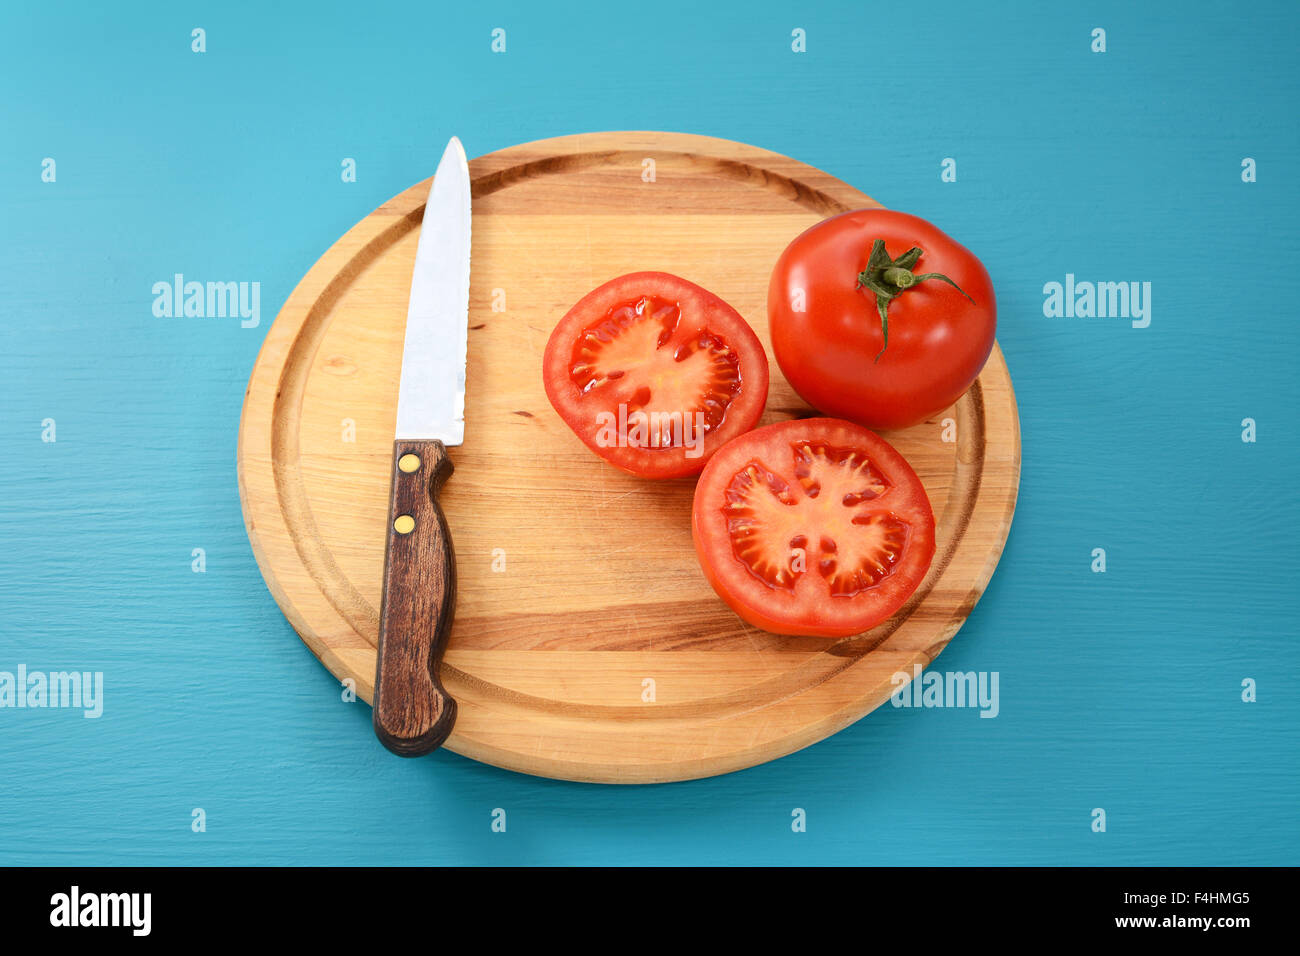 Whole and halved red tomato with serrated kitchen knife on a wooden chopping board Stock Photo